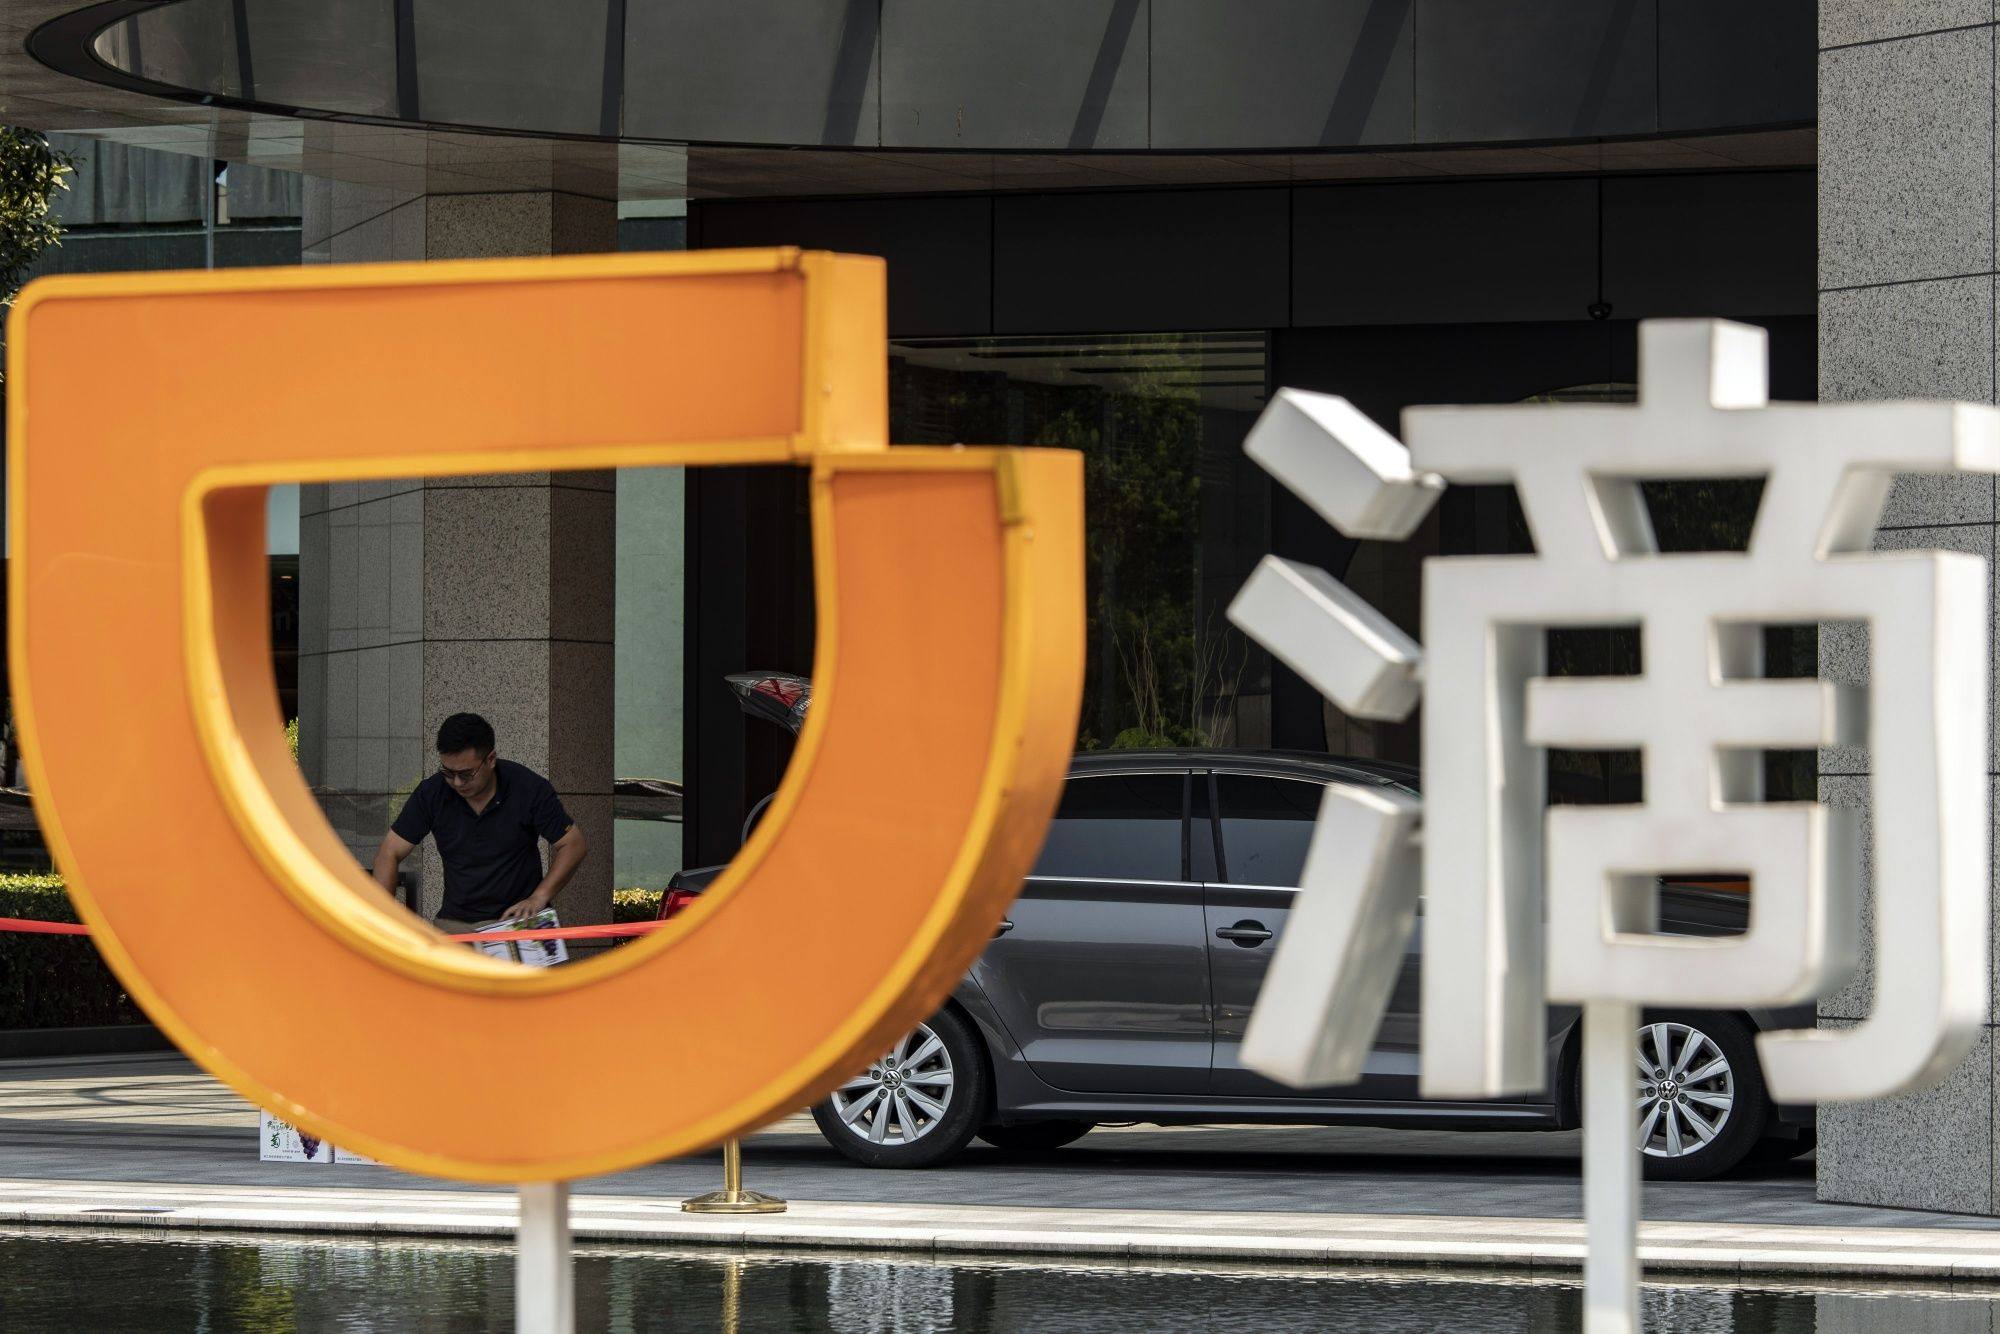 Didi’s offices in Hangzhou, China. Photo: Bloomberg